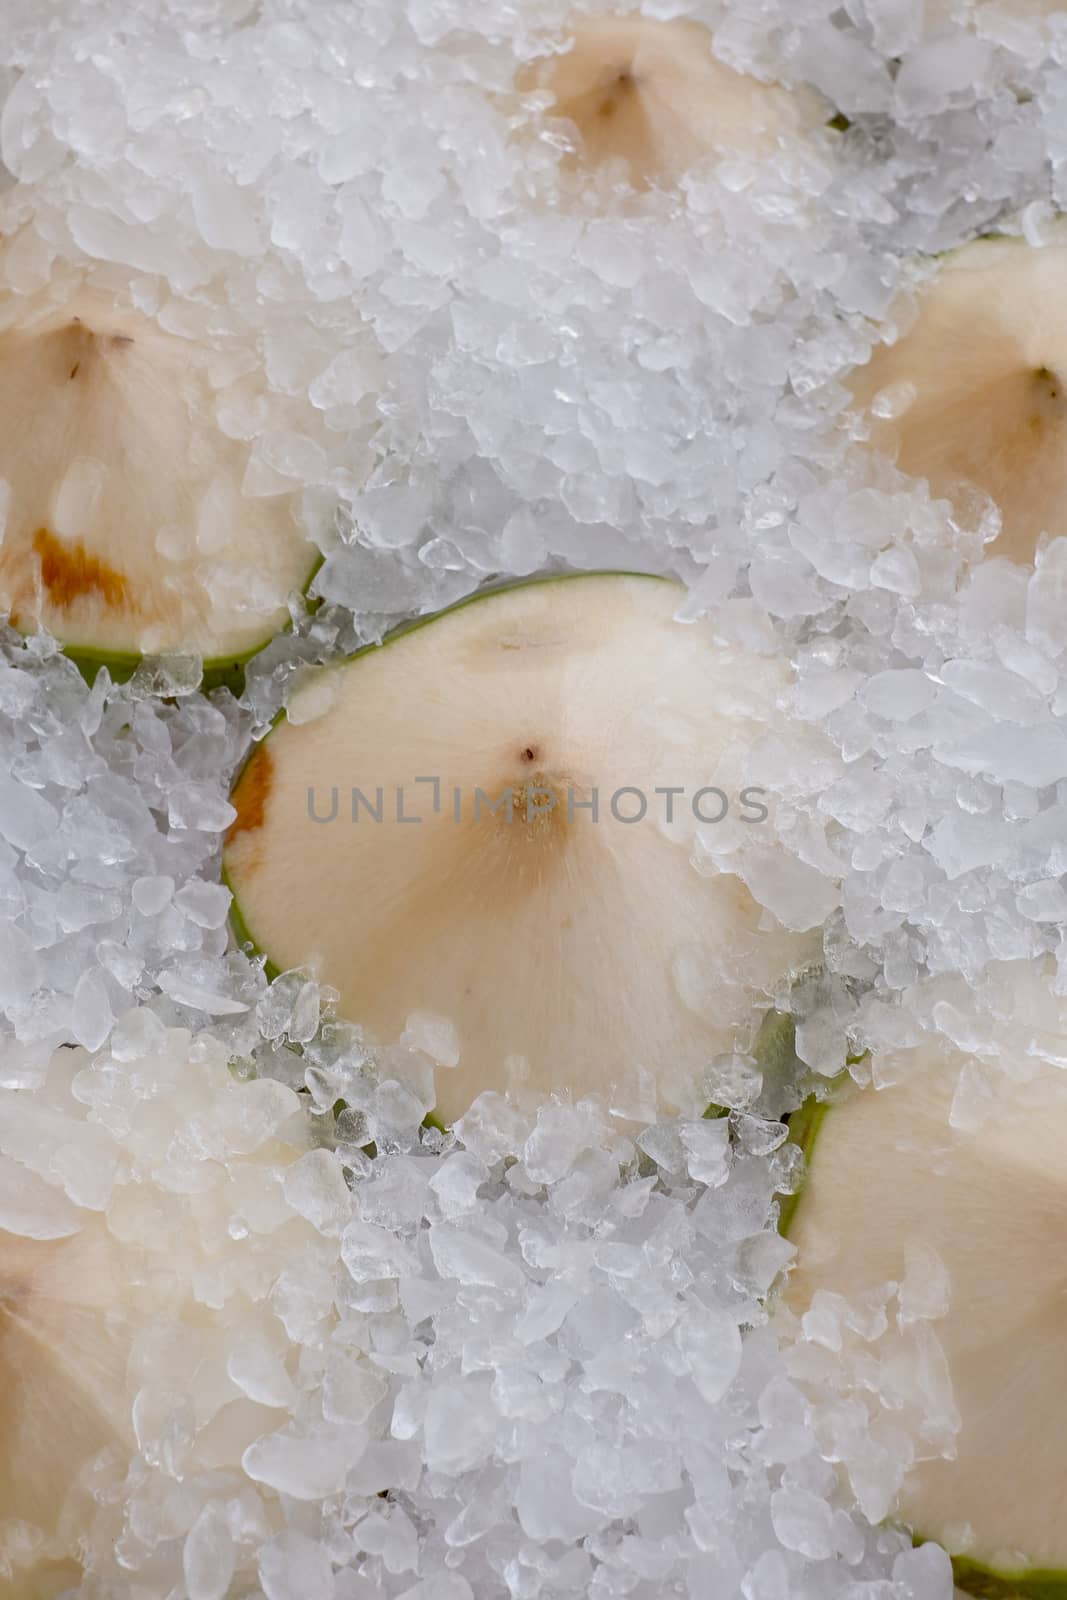 Cold Green coconuts in ice tank ready to drink